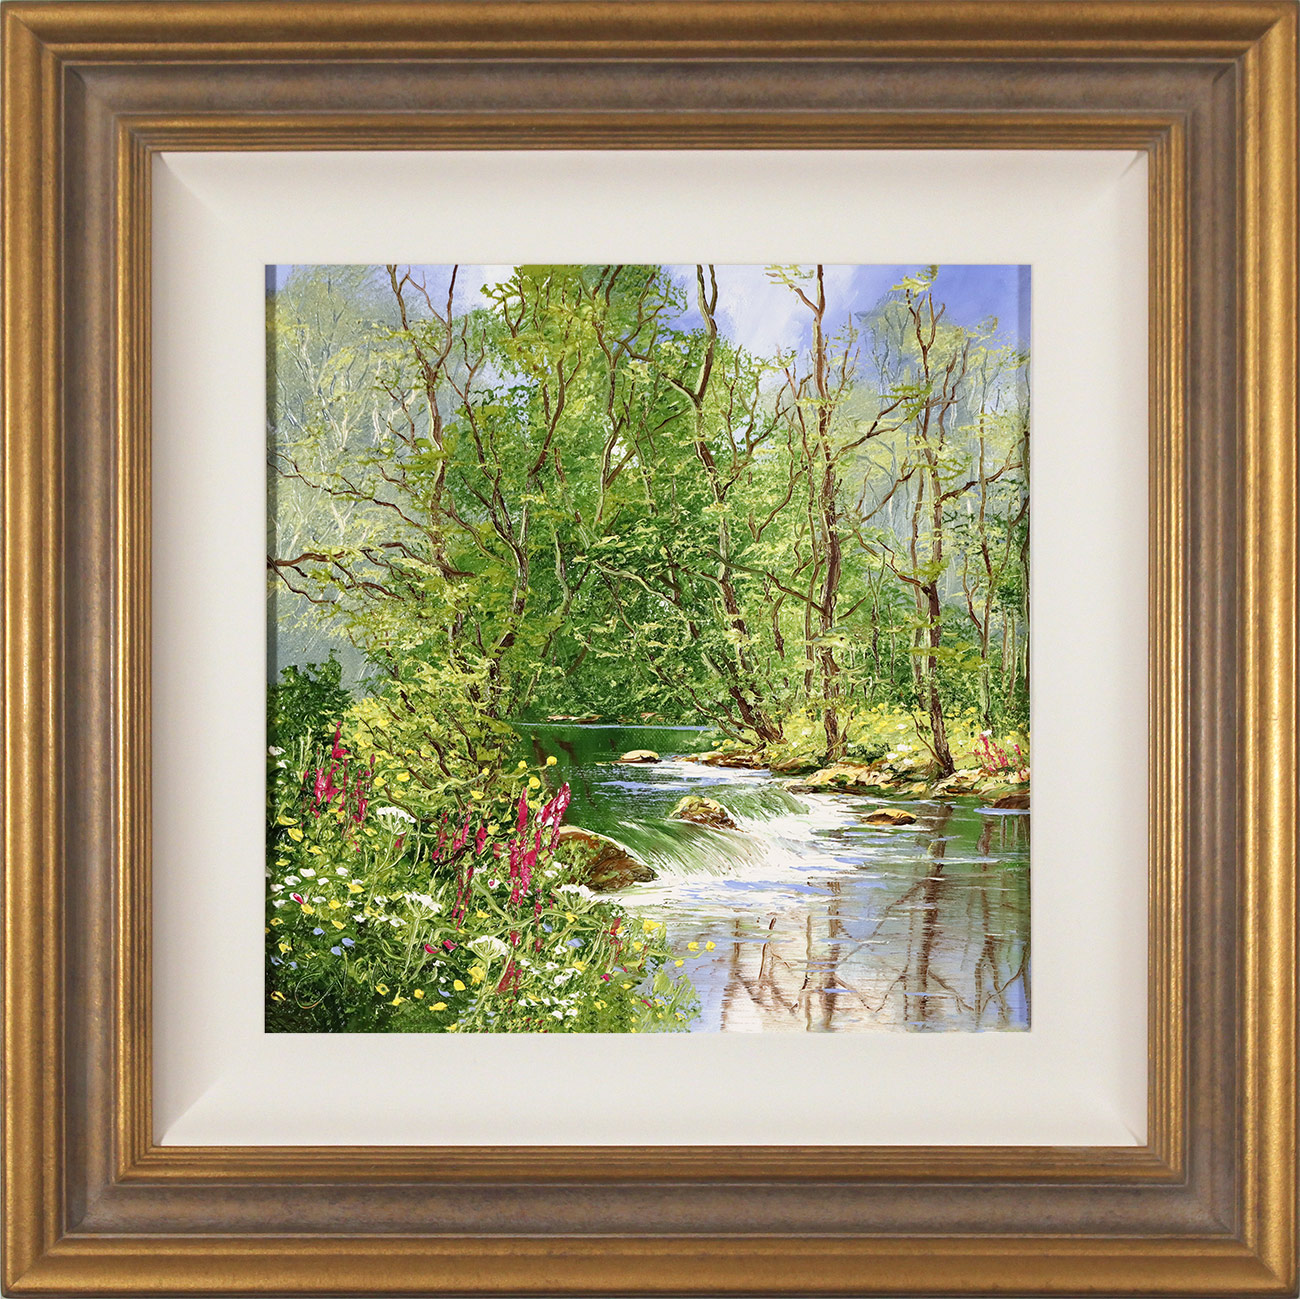 Terry Evans, Original oil painting on canvas, Woodland Stream Click to enlarge